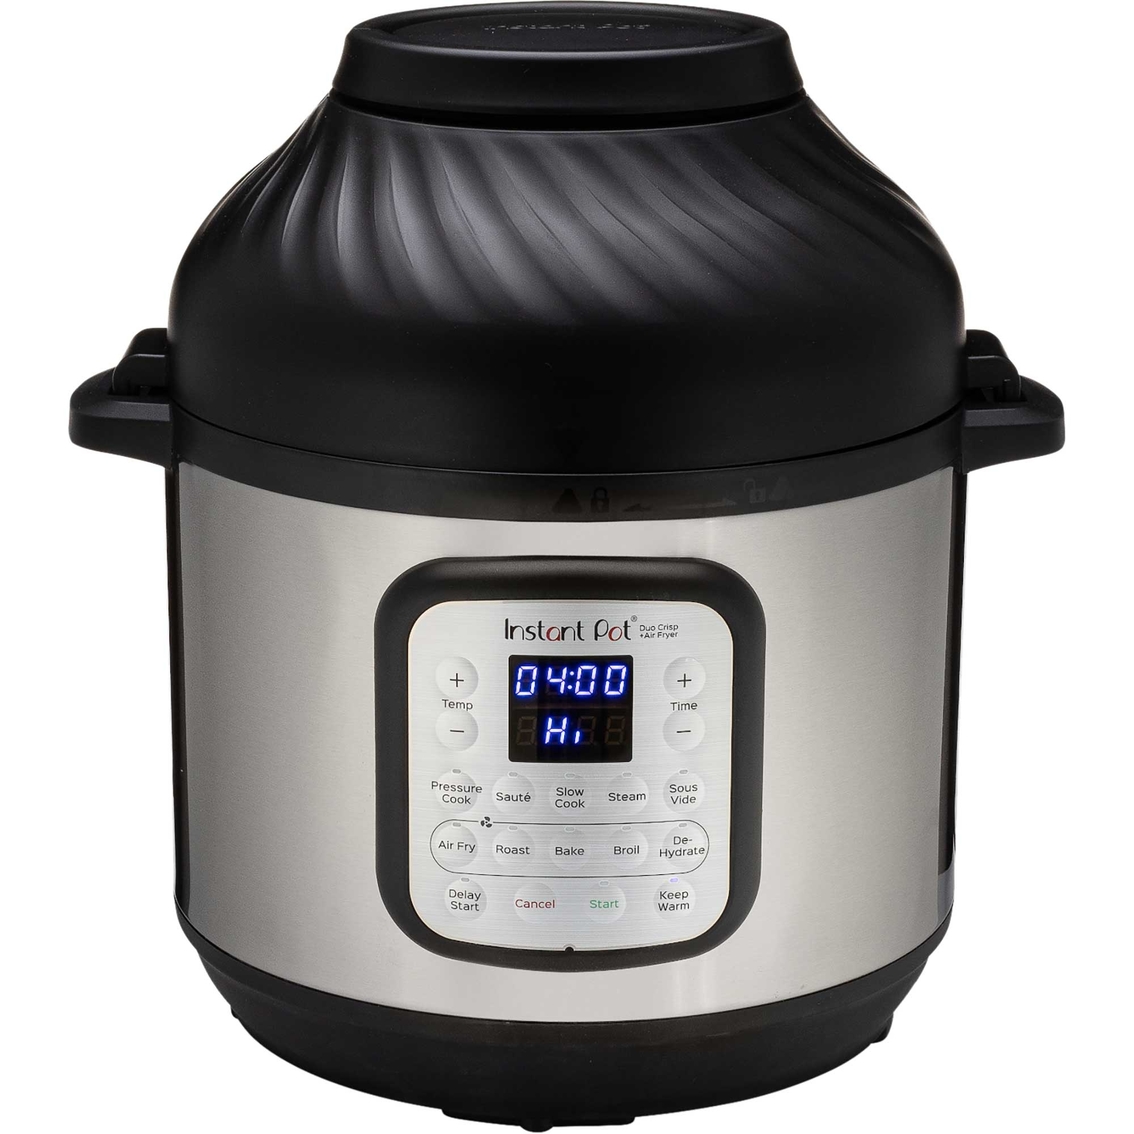 Instant Pot Duo Crisp Multi Use Programmable Pressure Cooker And